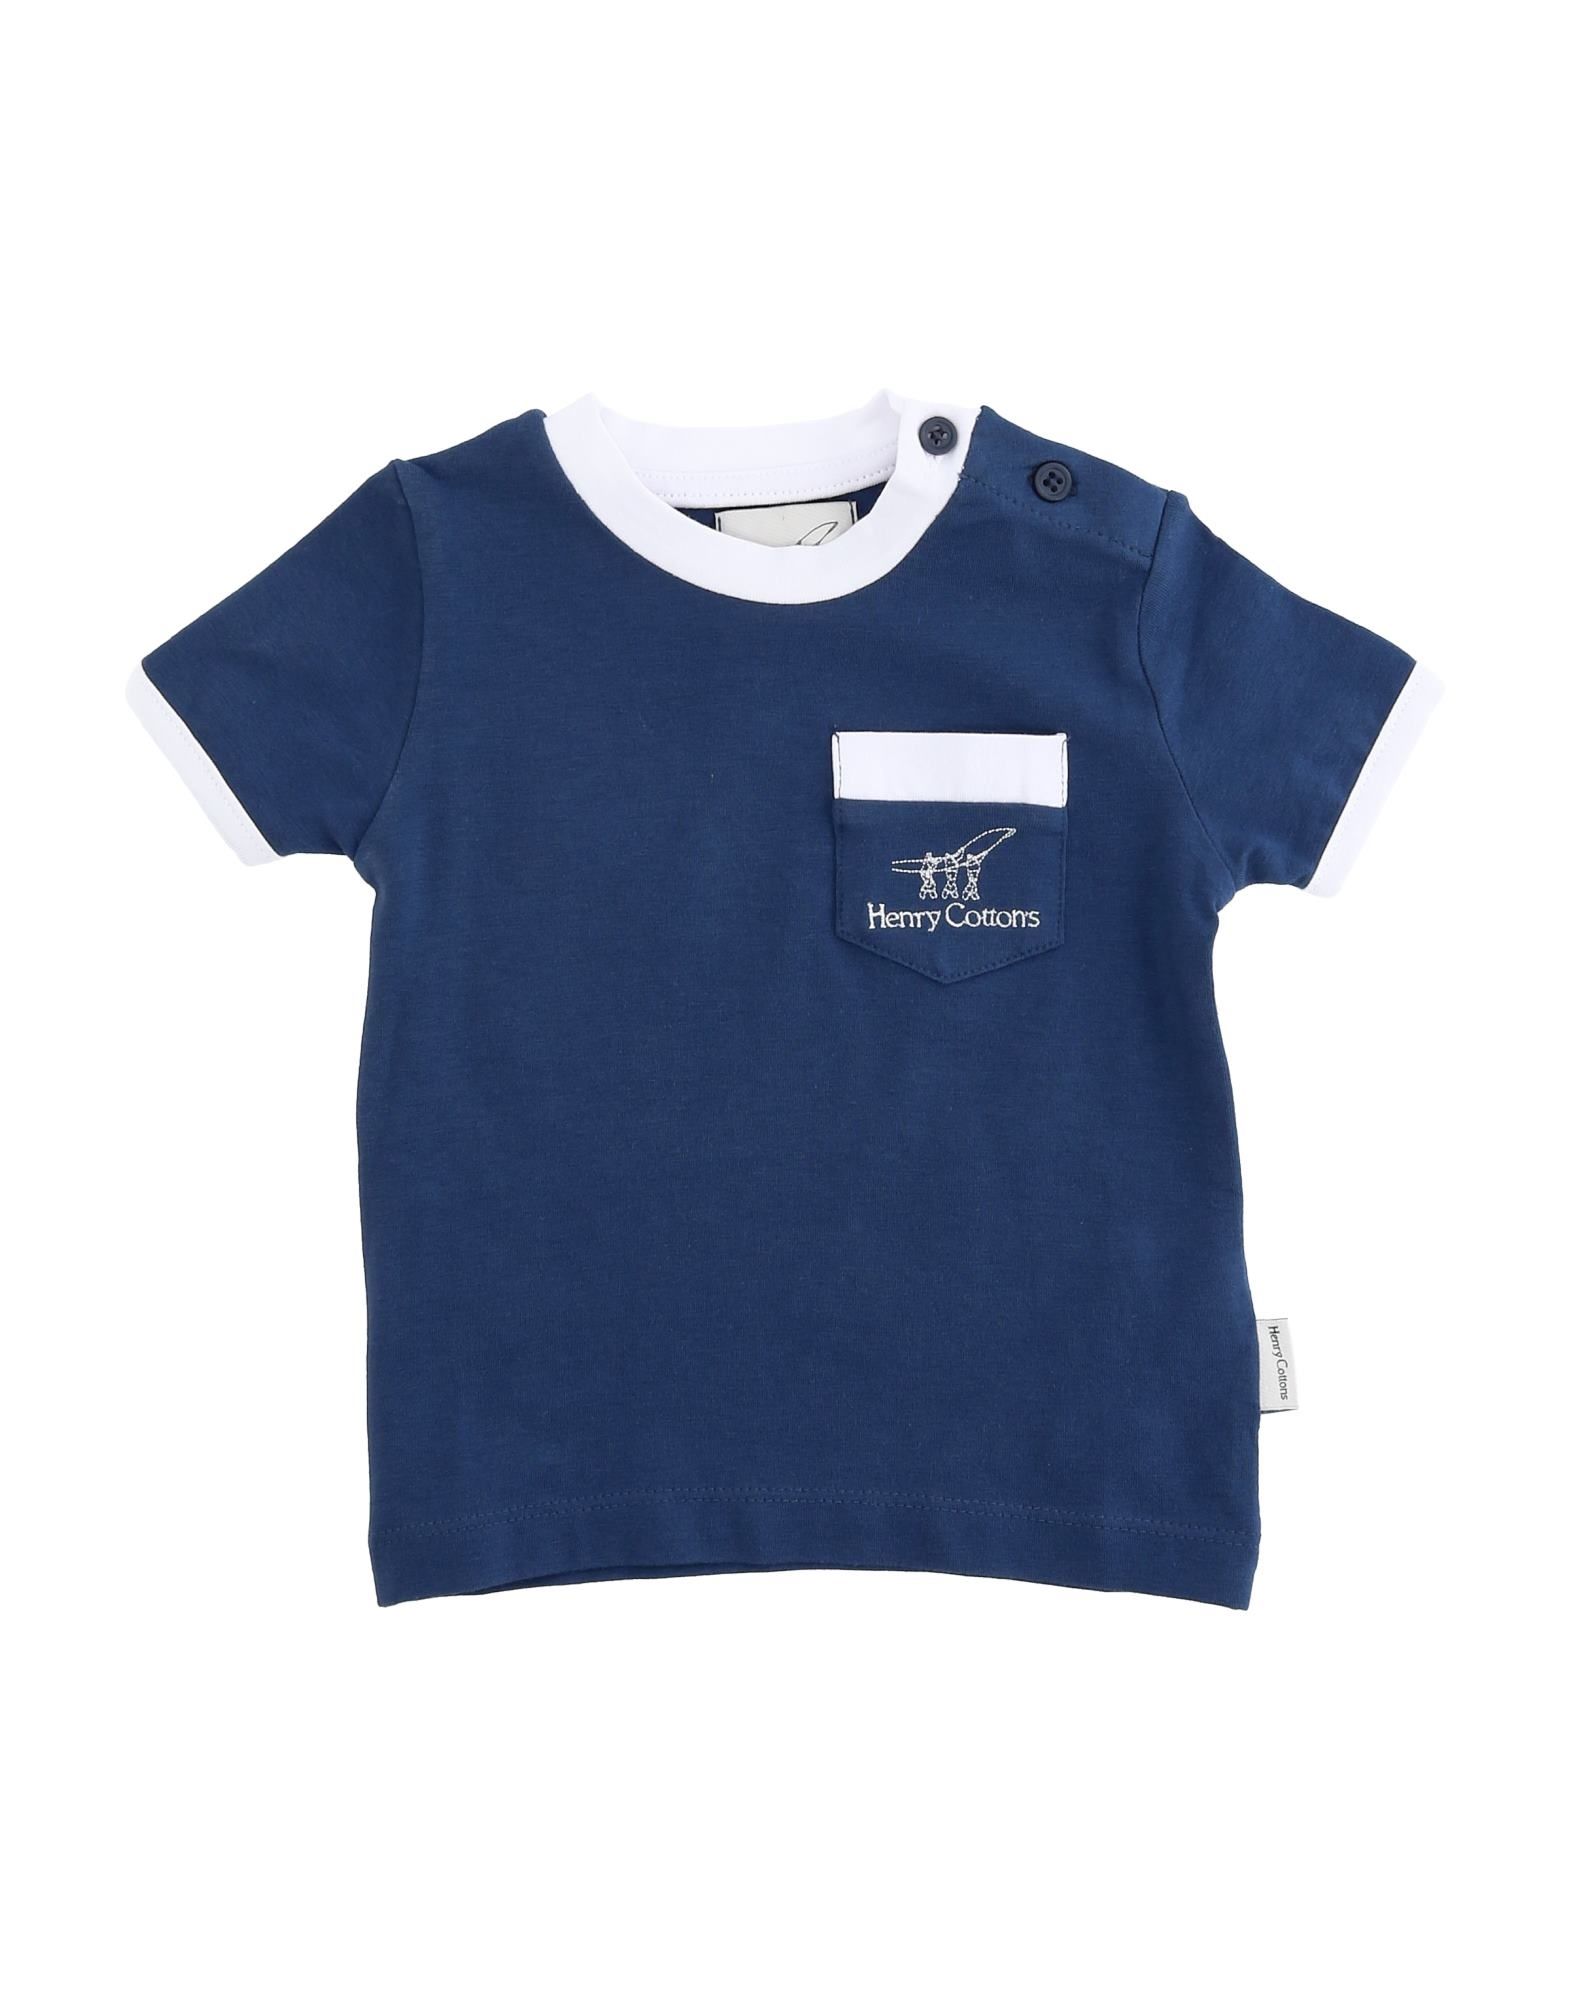 Henry Cotton's Kids' T-shirts In Pastel Blue